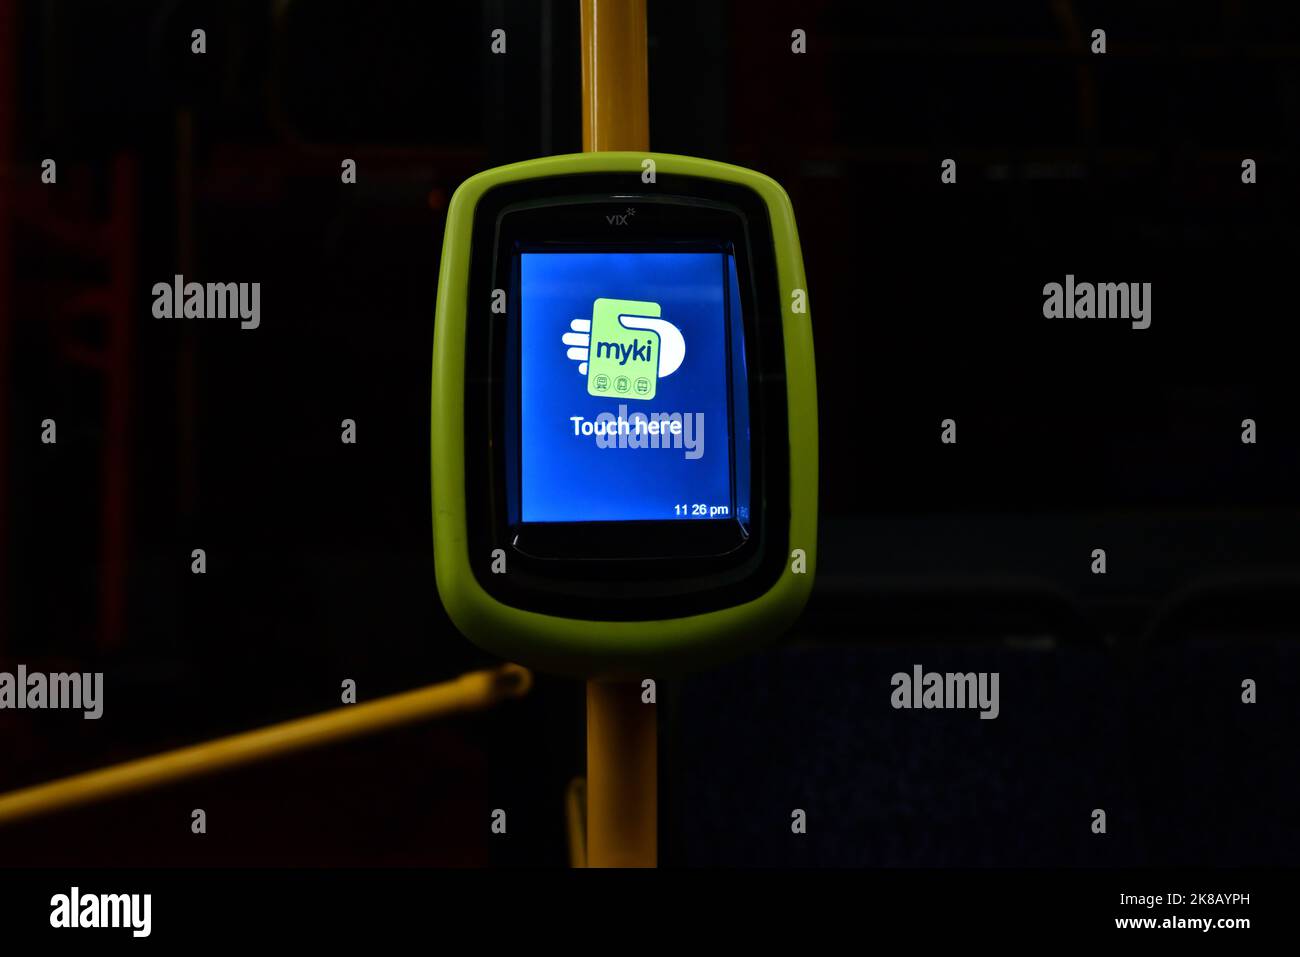 Illuminated LCD screen of a VIX Myki ticket reader, with message to passengers to touch here, on a bus late at night Stock Photo